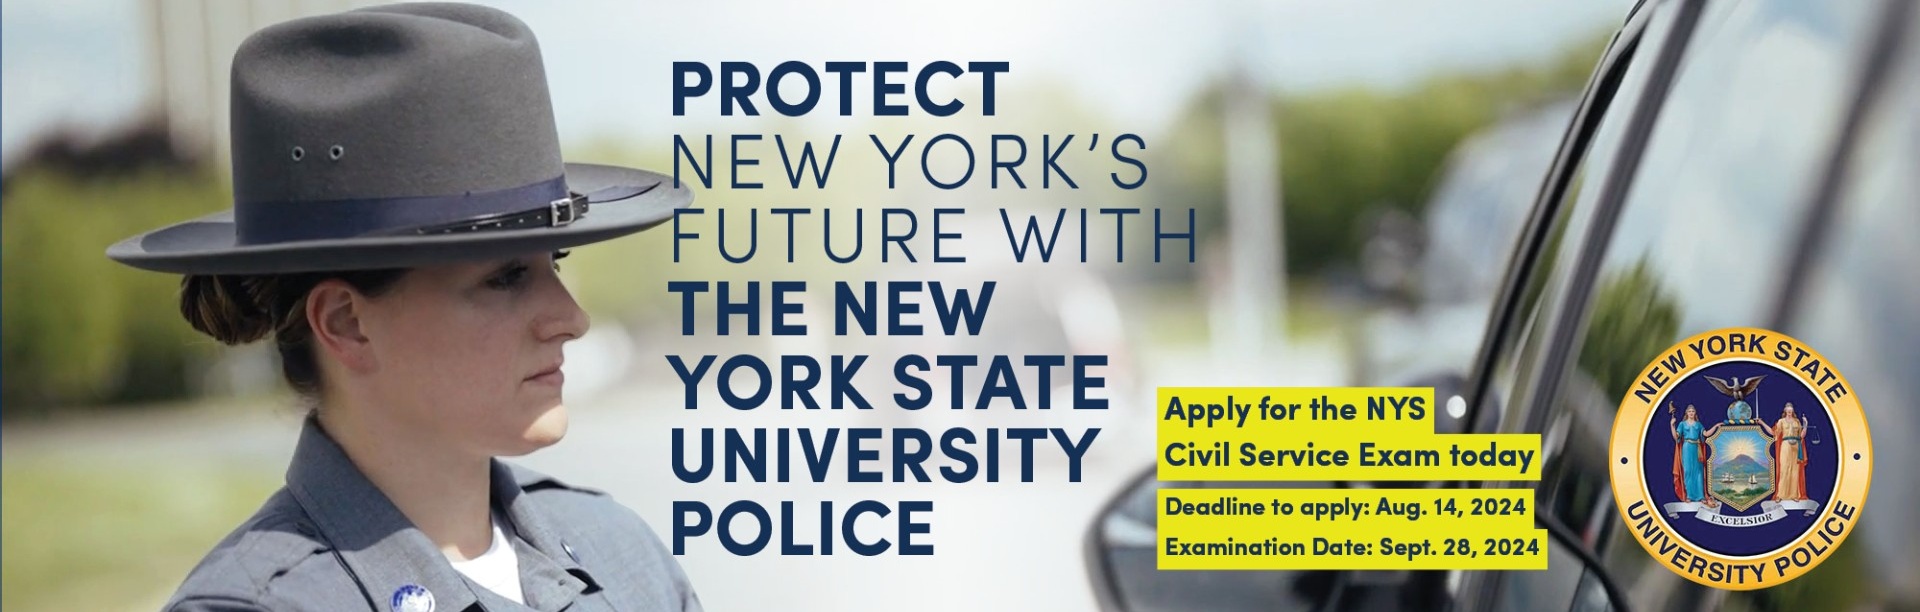 University police recruitment event. Apply for the civil service exam today. 